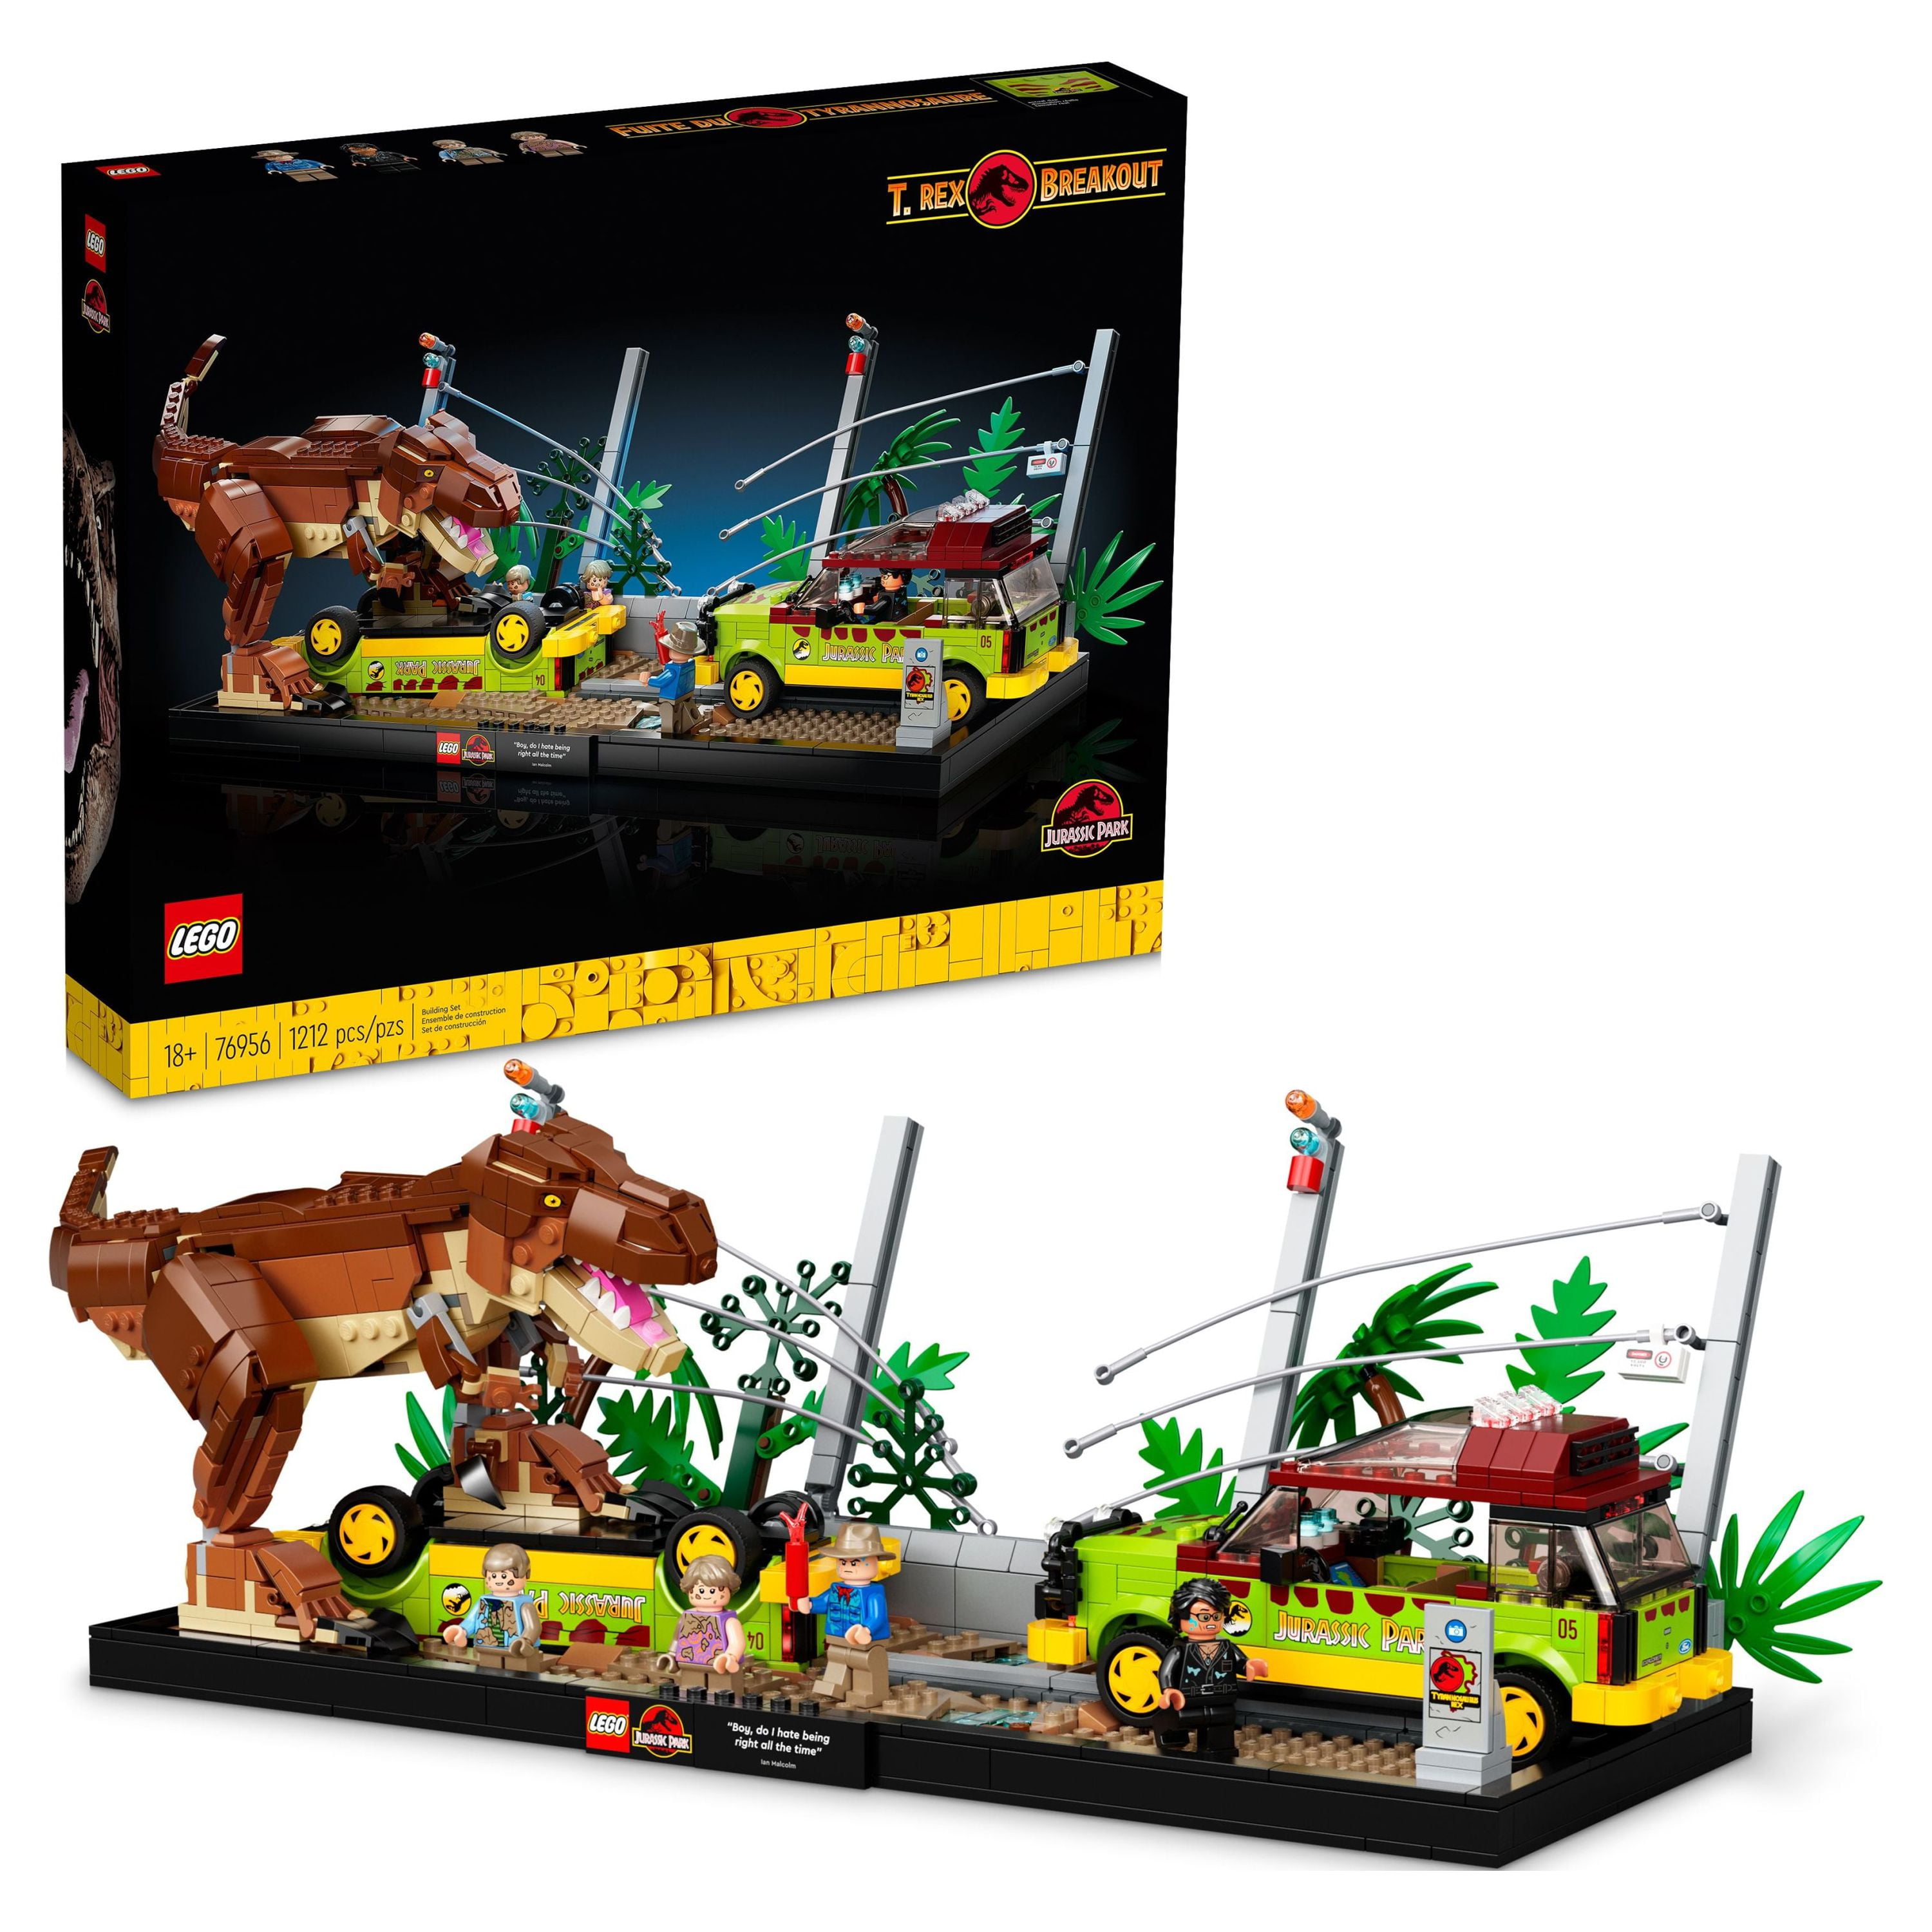 LEGO Jurassic Park T. rex Breakout 76956 Dinosaur Model Kit with 2 Ford  Explorer Cars and 4 Minifigures, Nostalgic 90's Movie Gift Idea for Adults  and